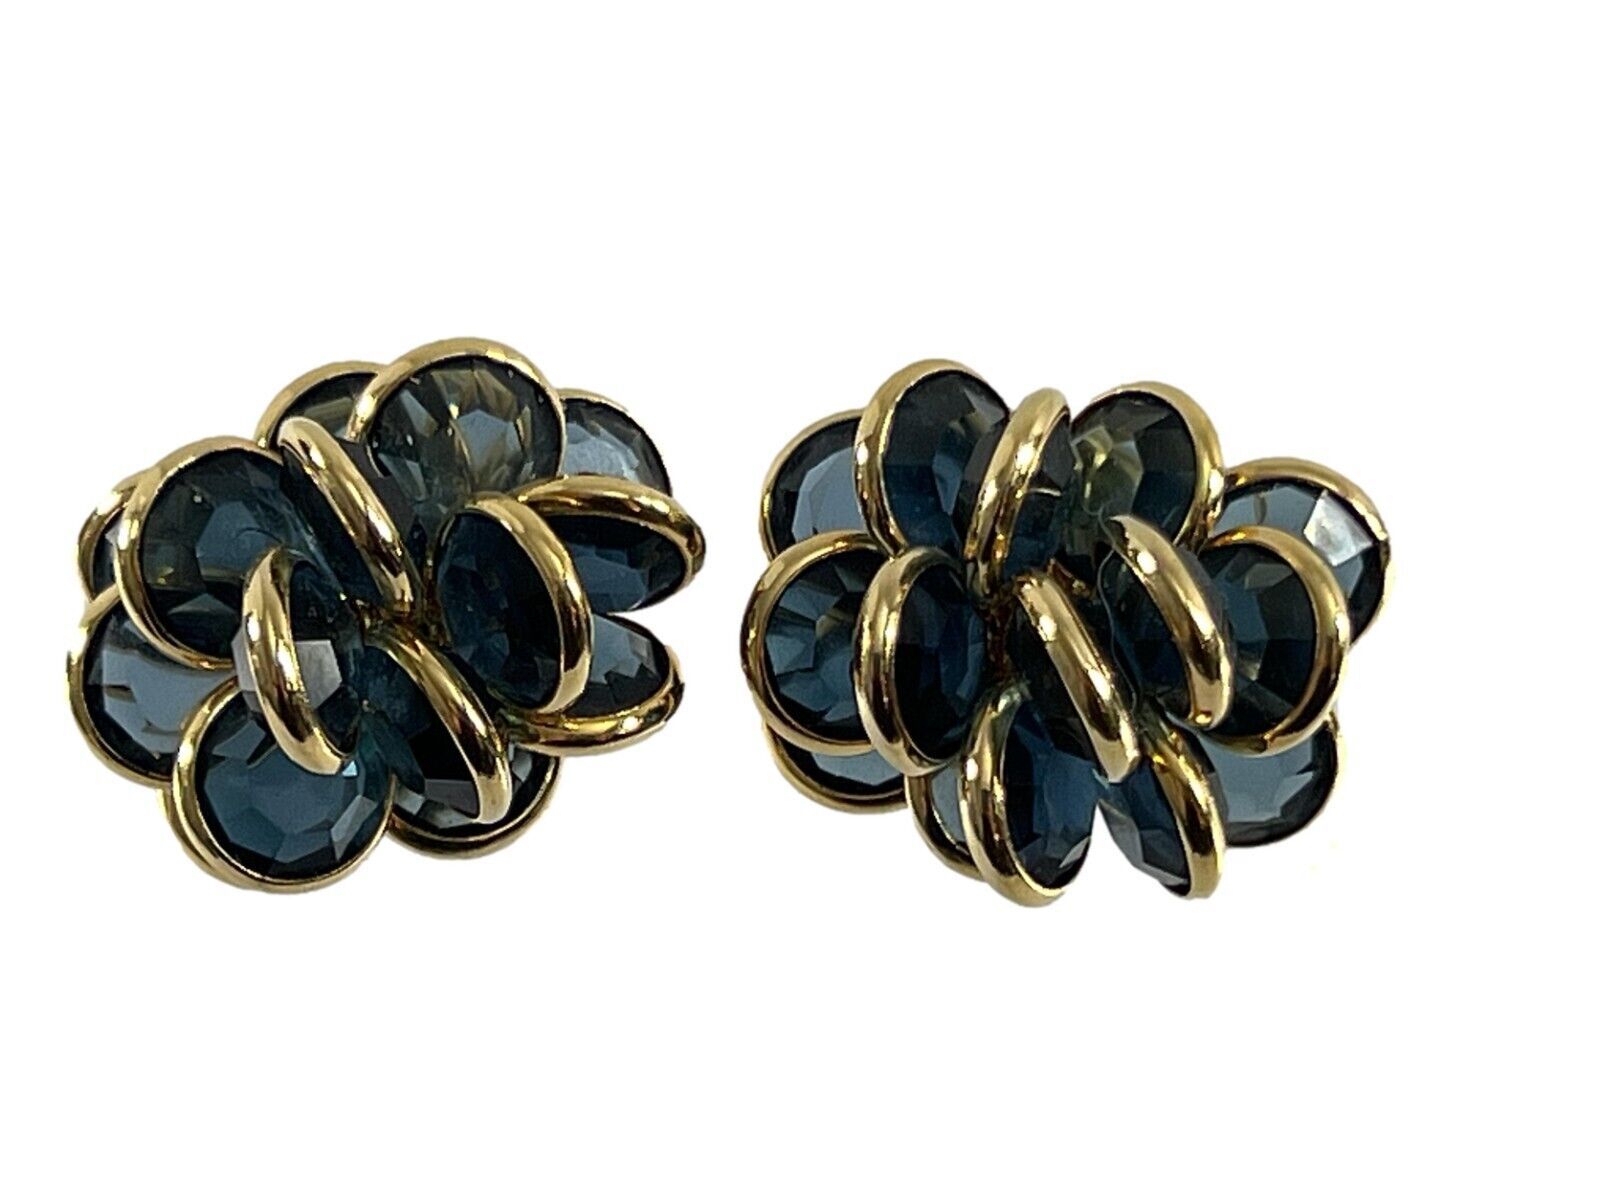 Primary image for Vintage Neiman Marcus Clip On Earrings Blue Gold Tone Swarovski Crystal Cluster